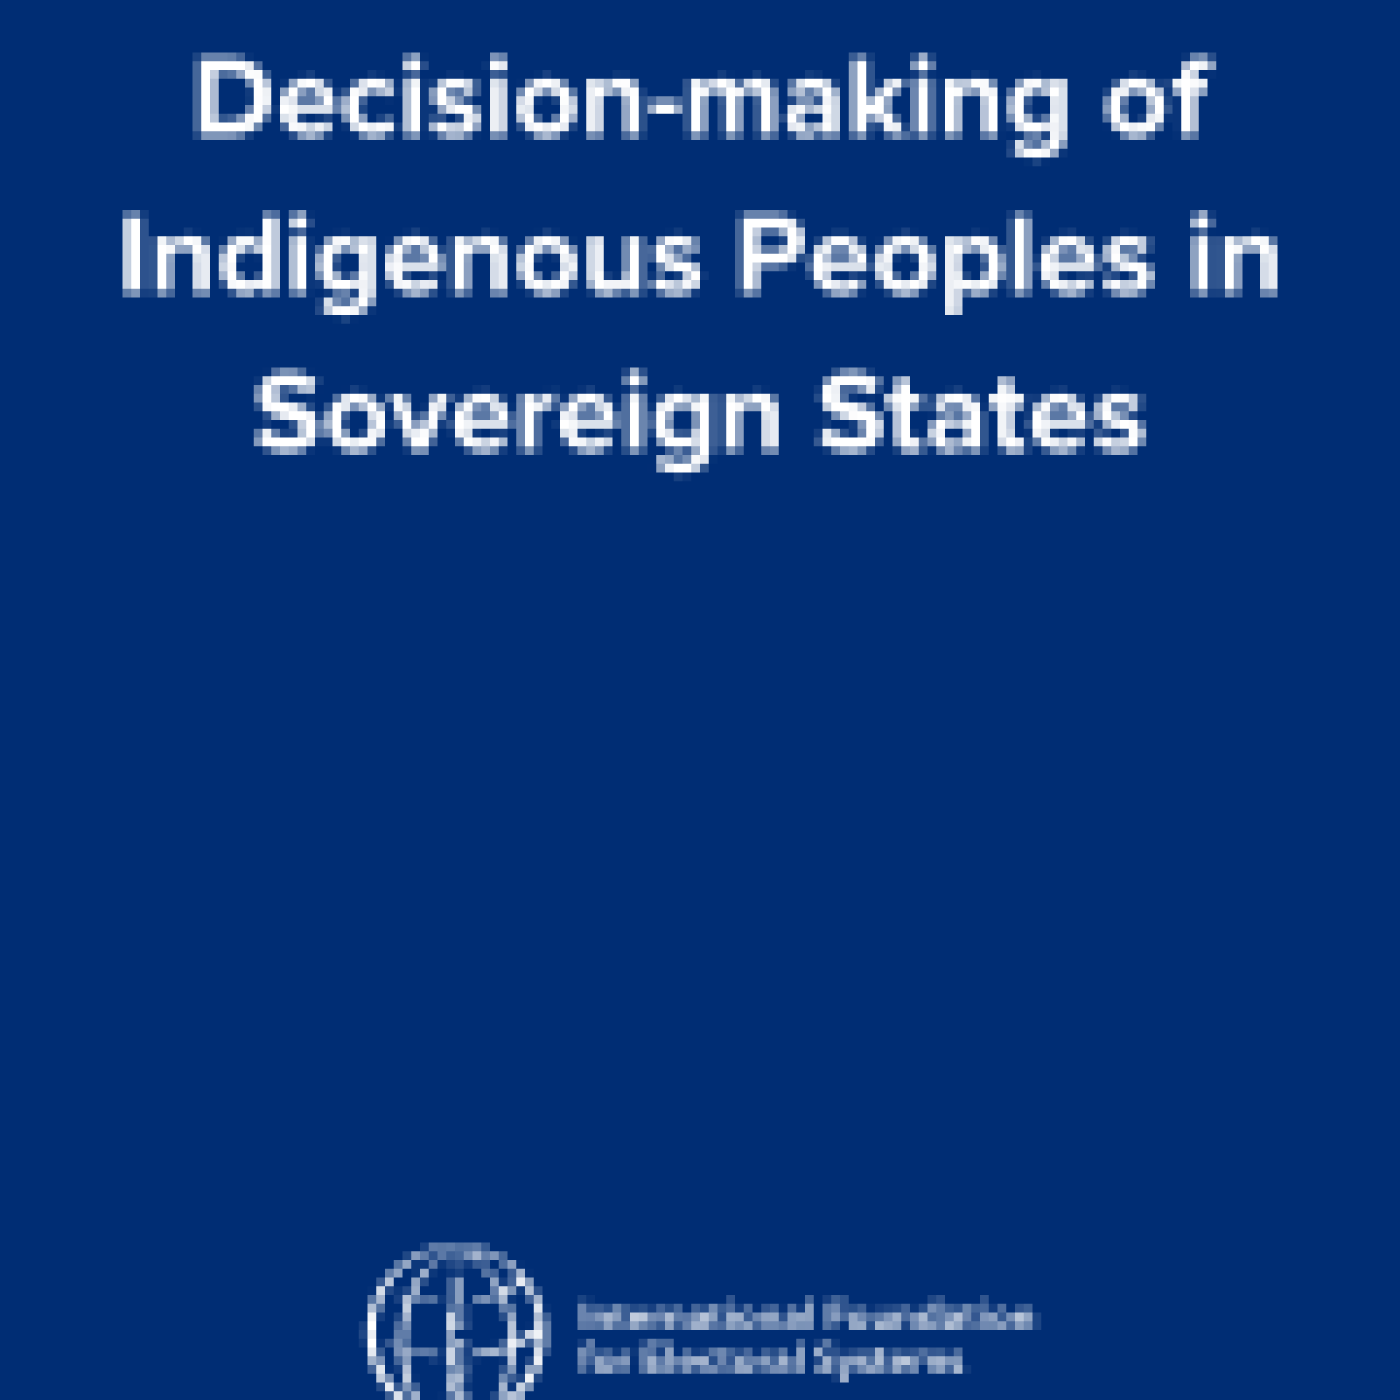 Elections and Inclusive Decision-making of Indigenous Peoples in Sovereign States